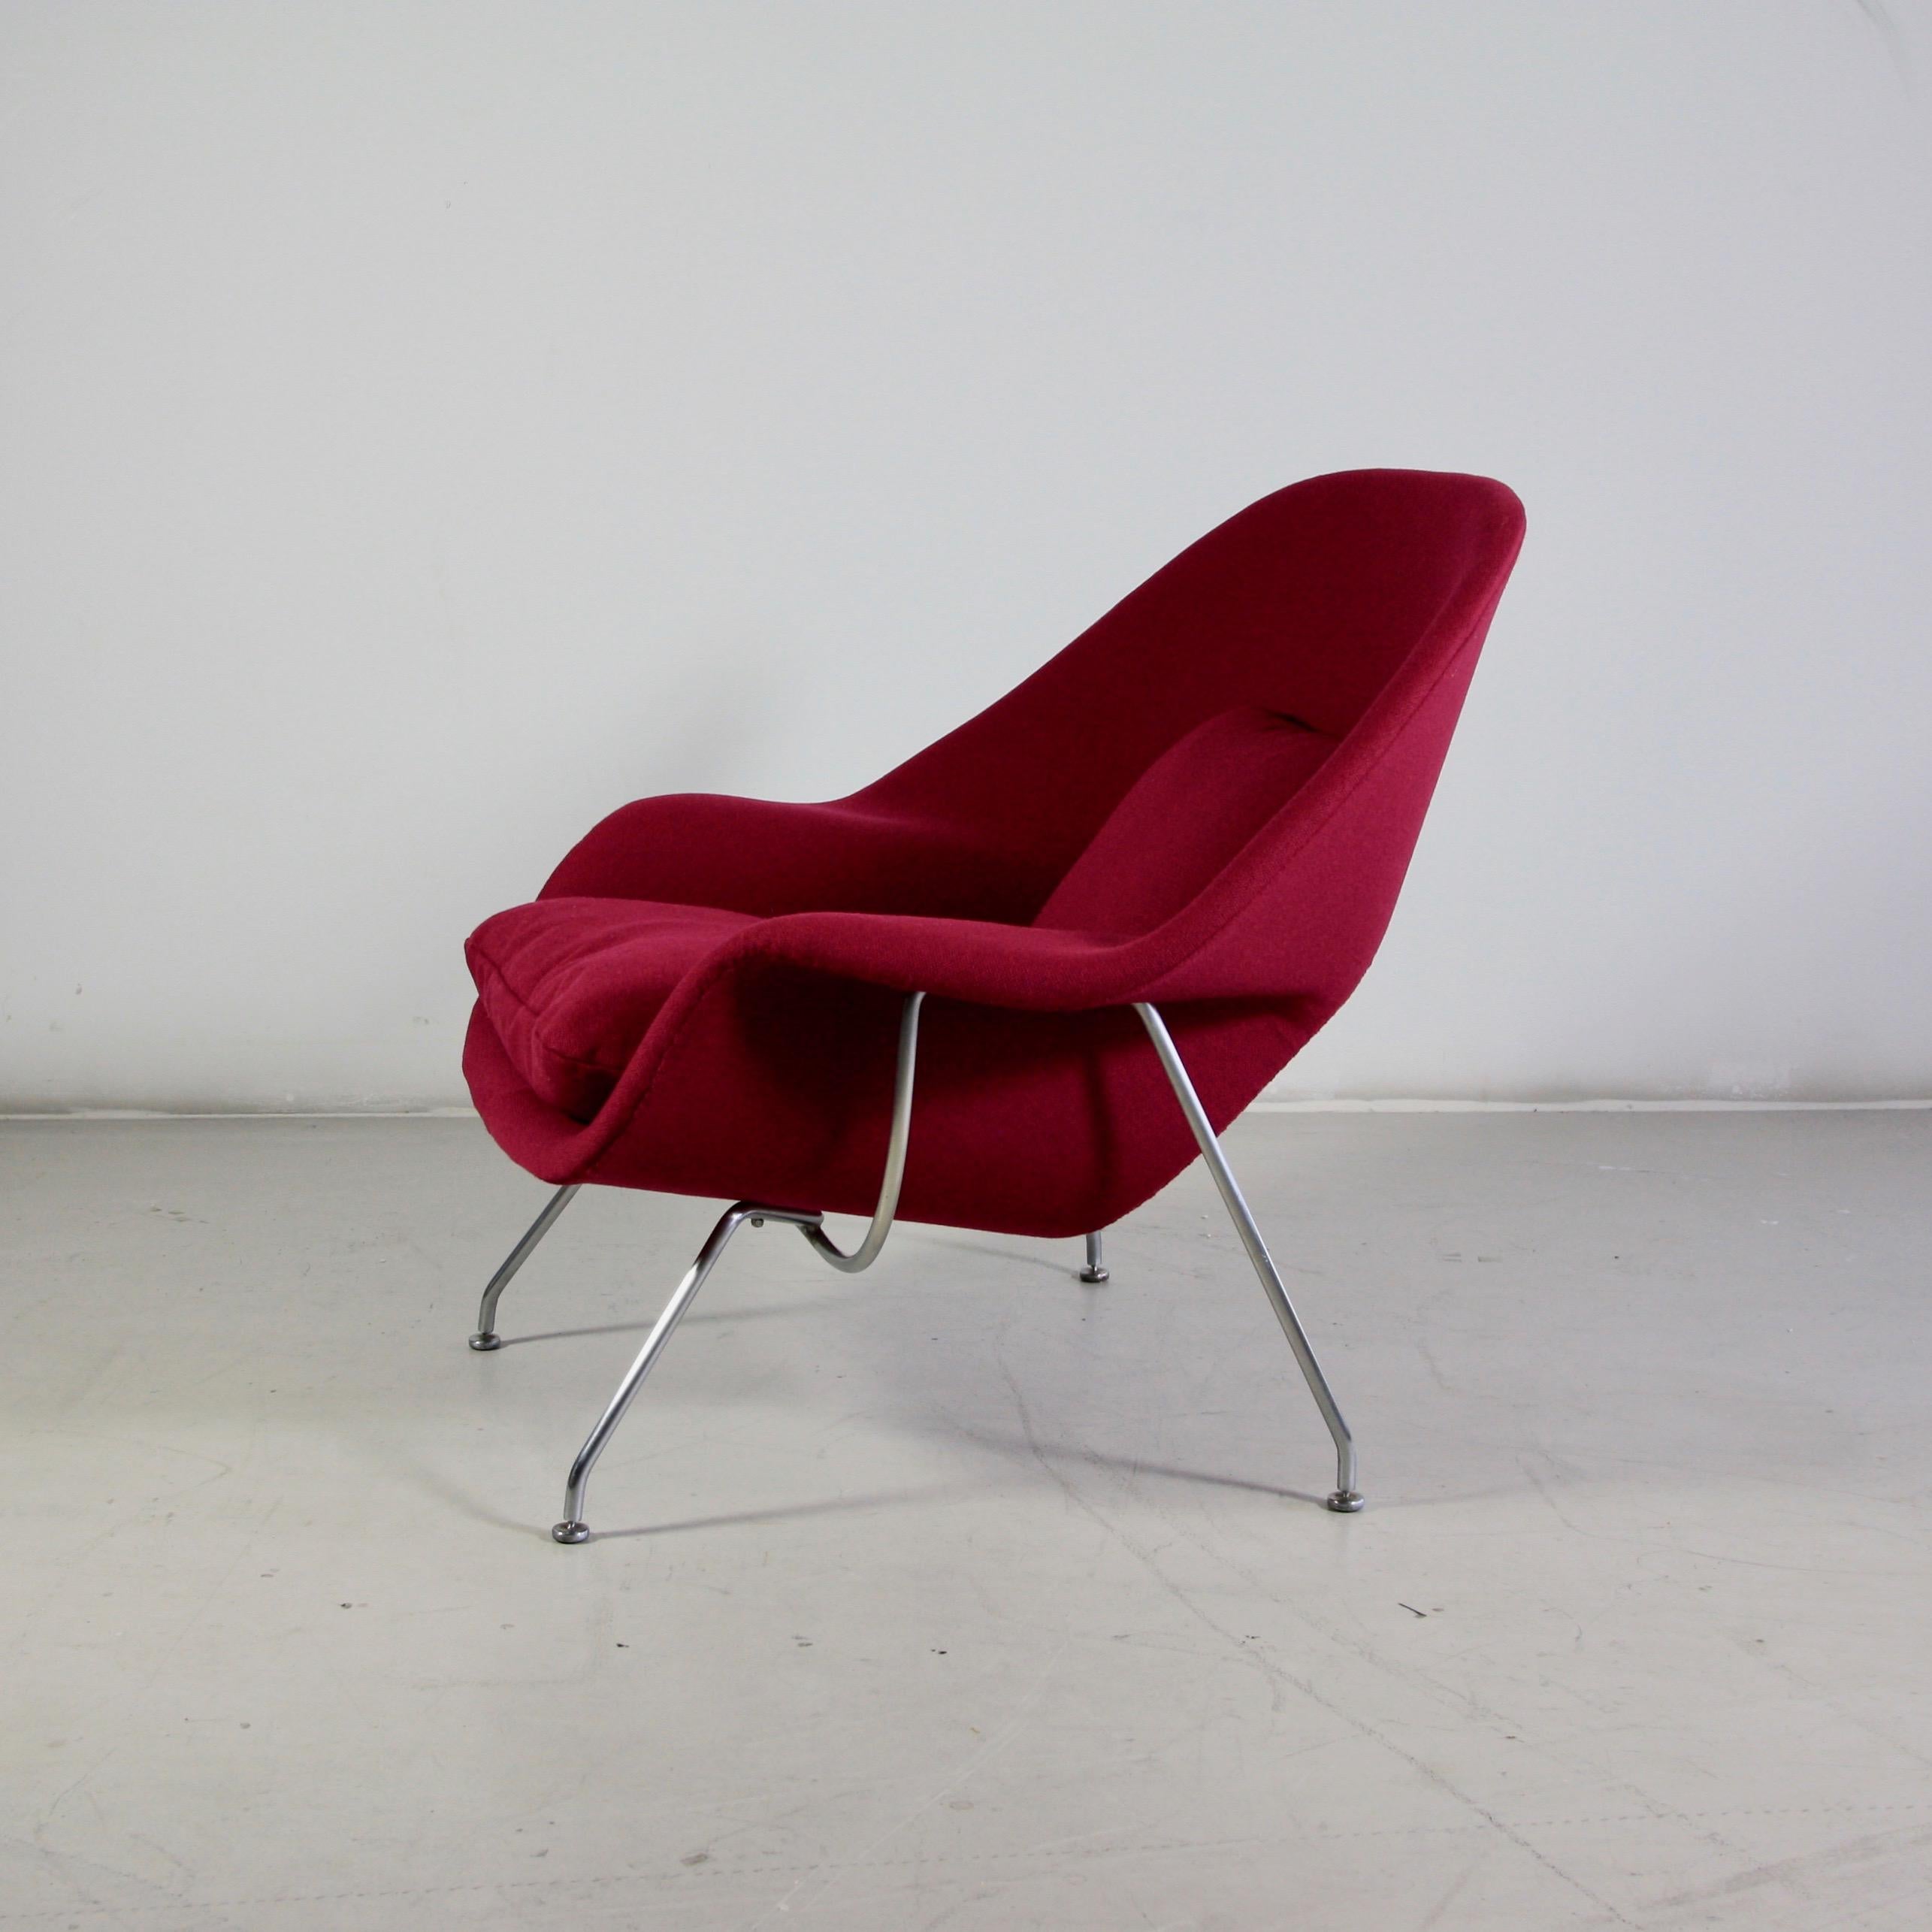 American Womb Chair with Footstool by Eero Saarinen for Knoll, 1959